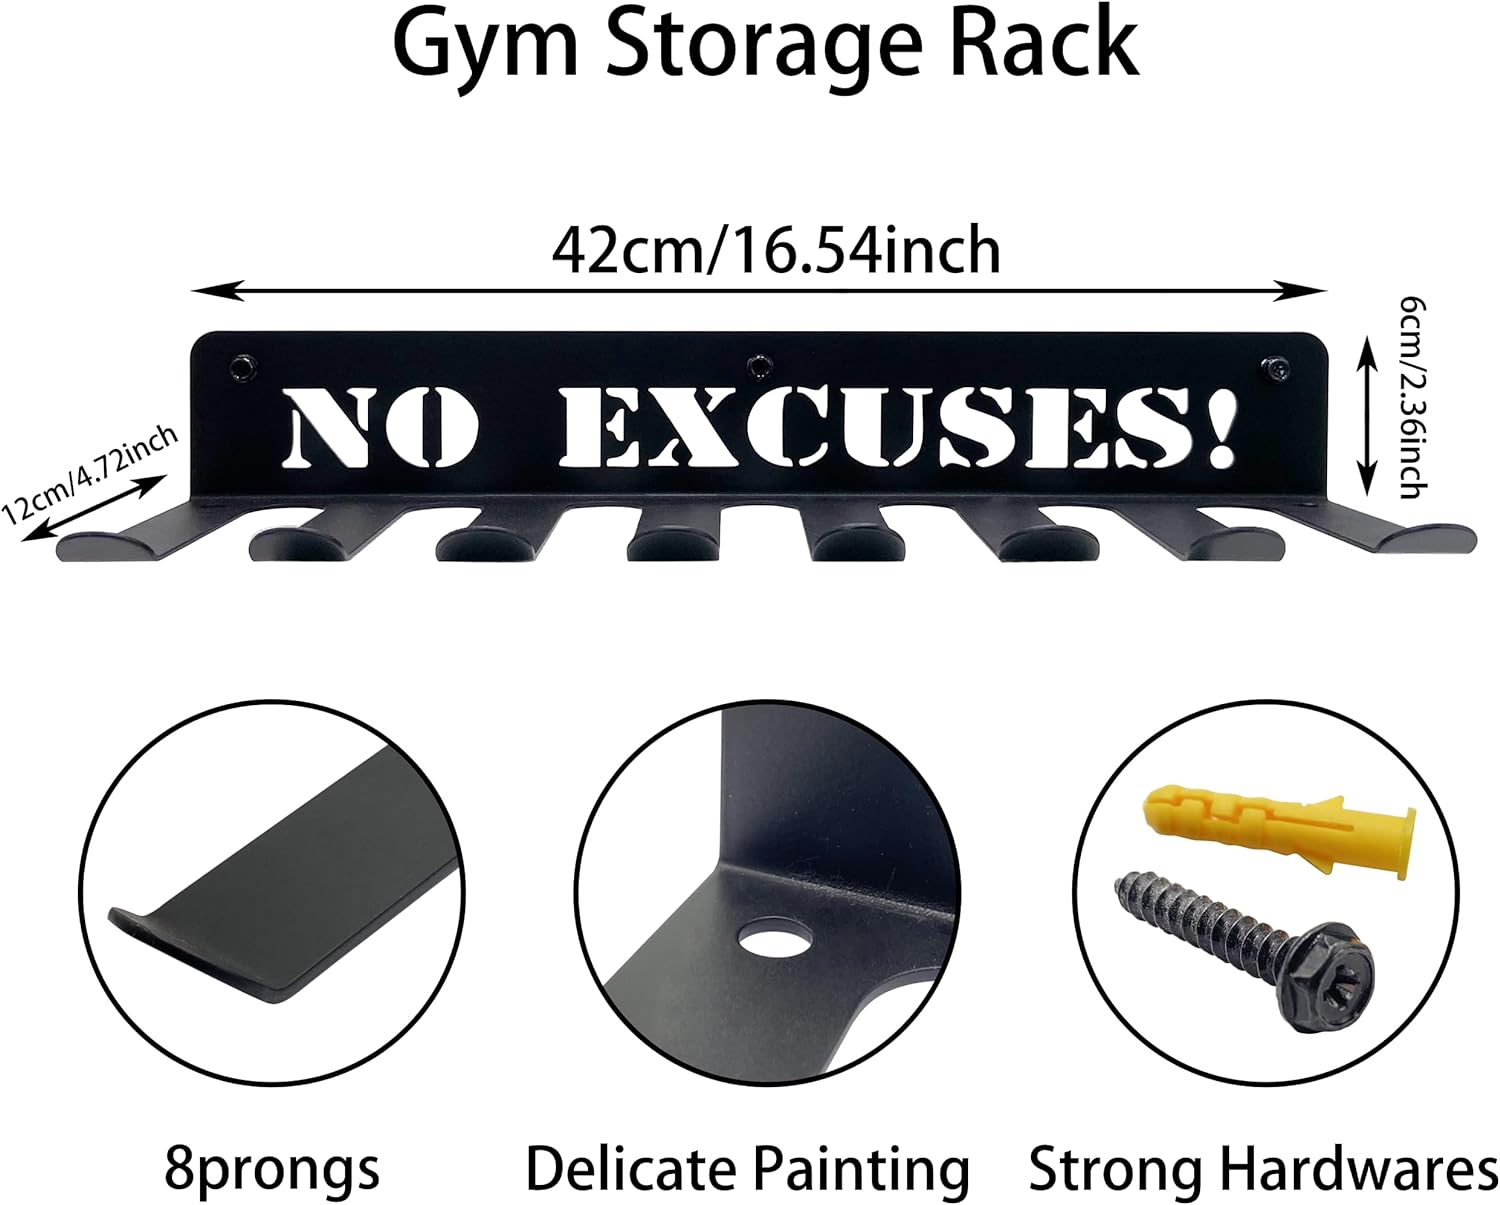 Home Gym Accessories Organization Storage Rack, Gym Equipment Storage For Home, 8 Hook Wall Hanger For Gear Barbells Resistance Bands Jump Ropes Lifting Belt